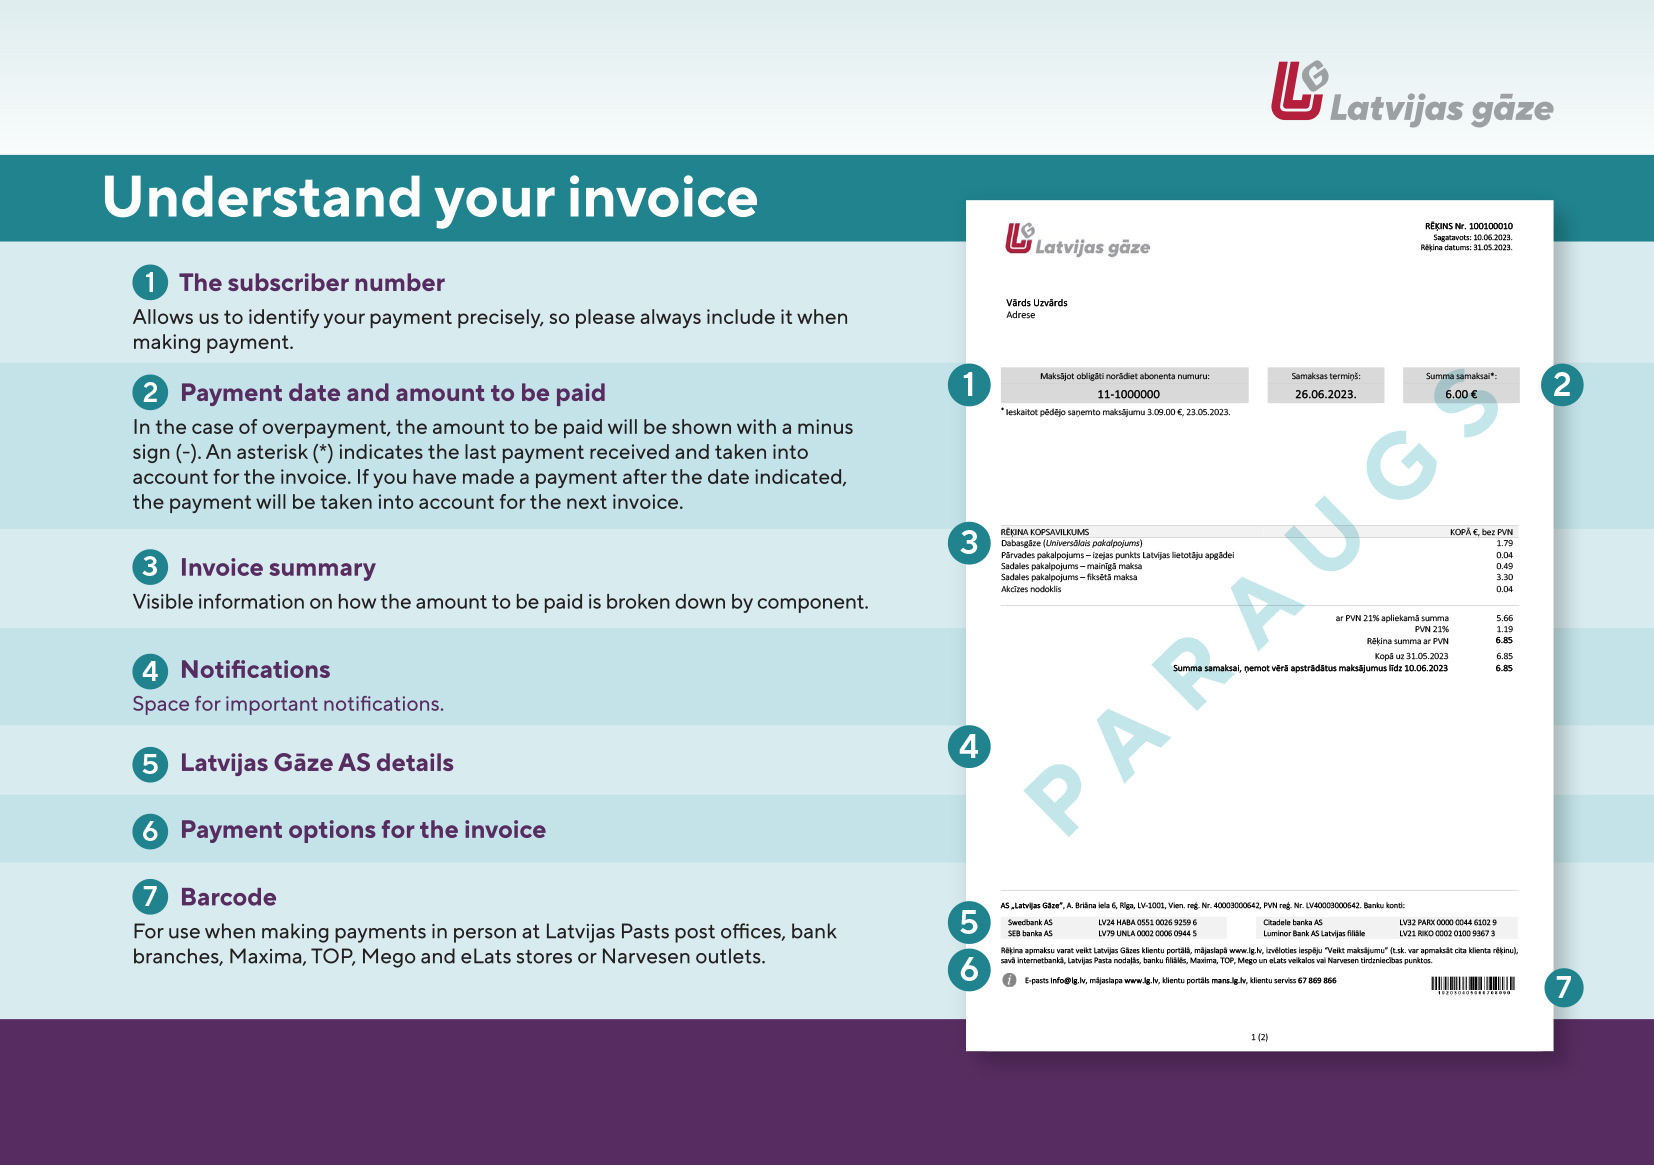 Understand your invoice